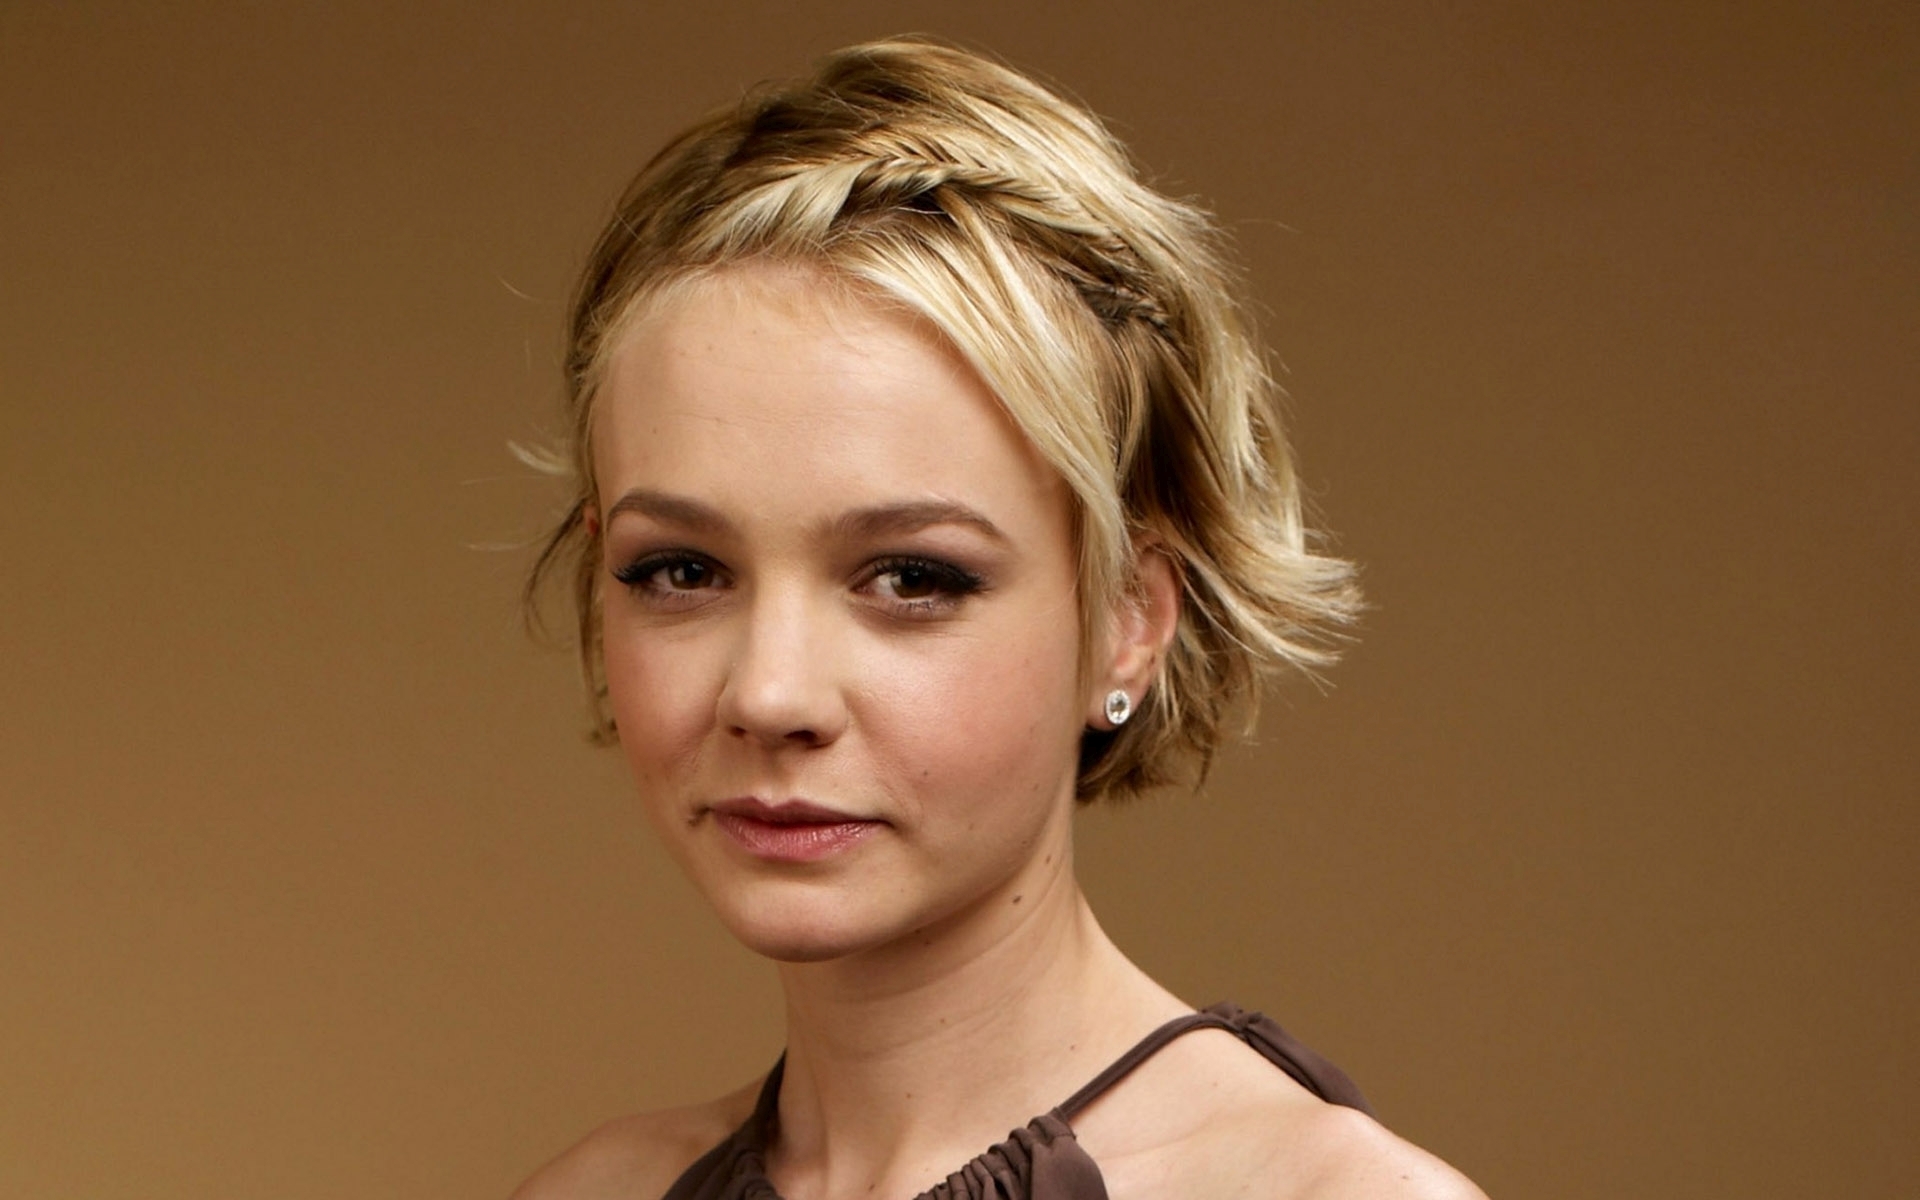 Poll: What is your favorite movie featuring Carey Mulligan?